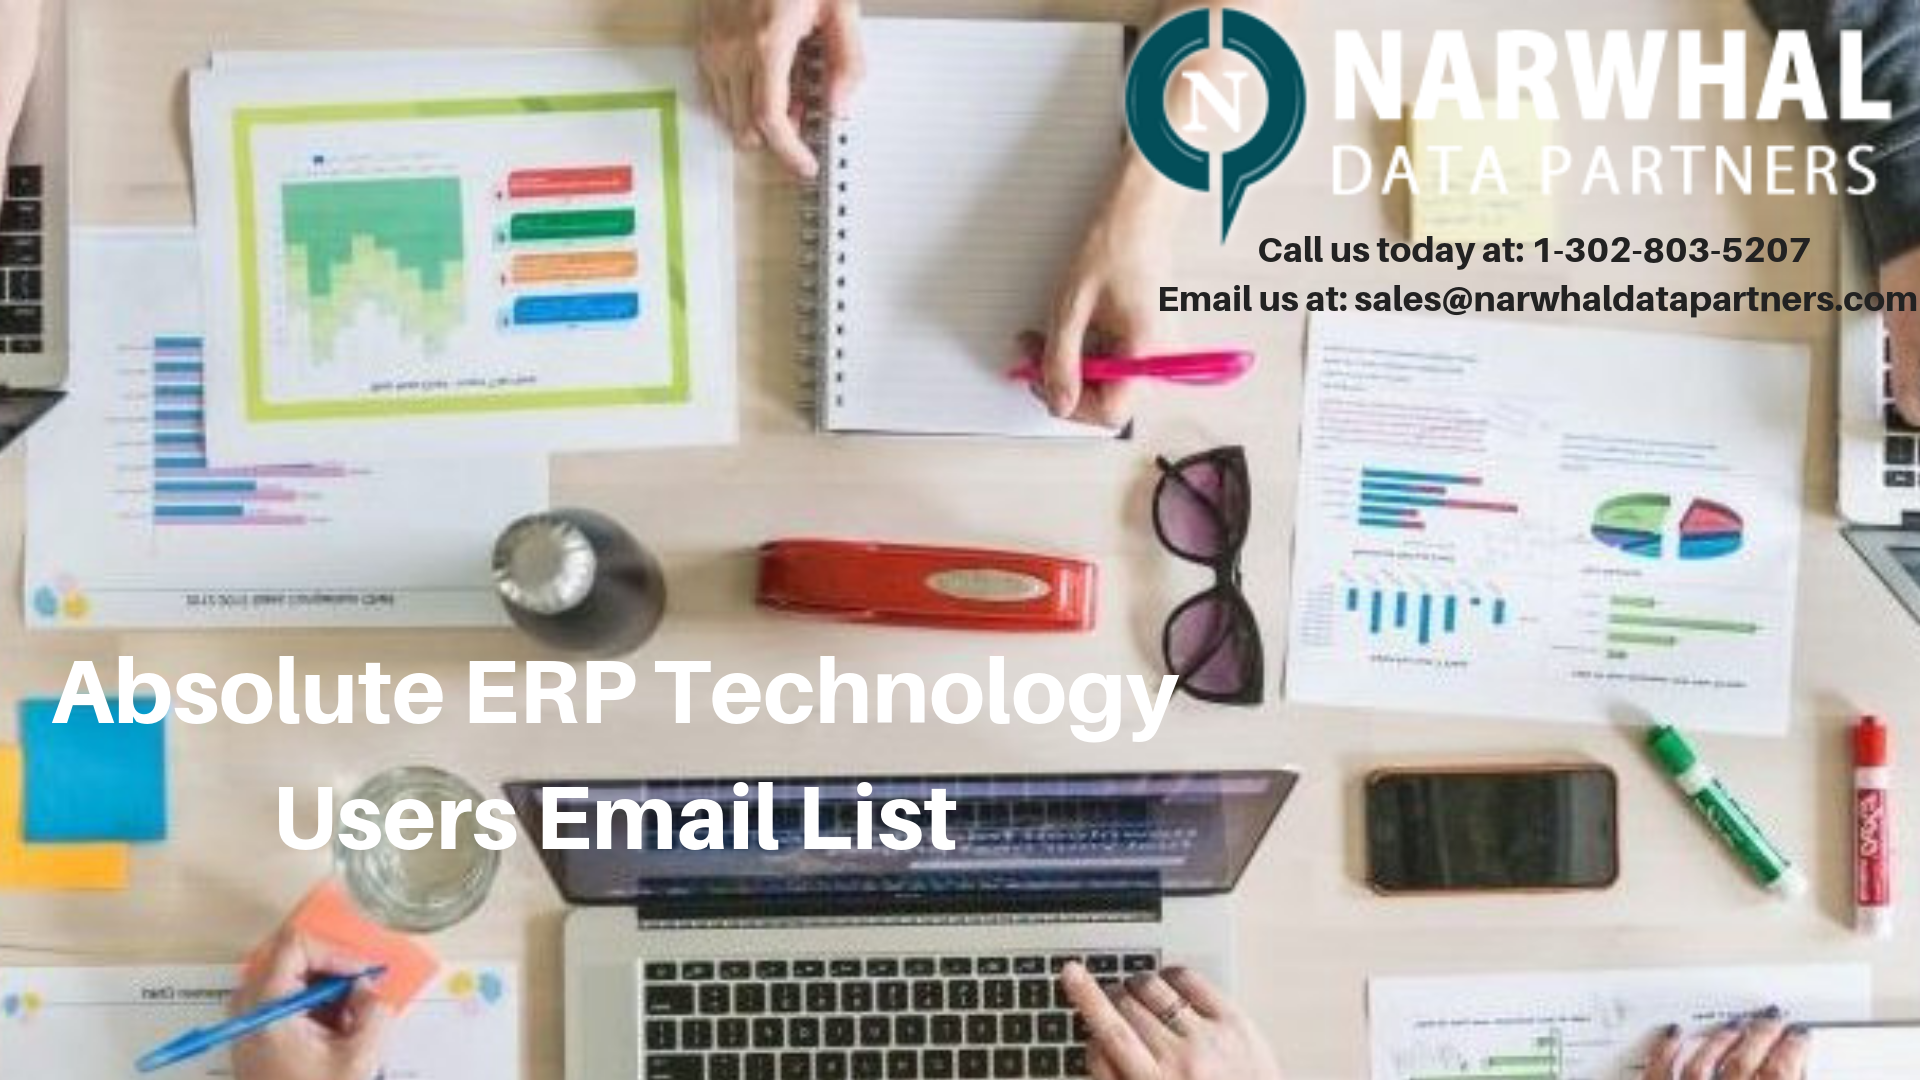 http://narwhaldatapartners.com/absolute-erp-technology-users-email-list.html